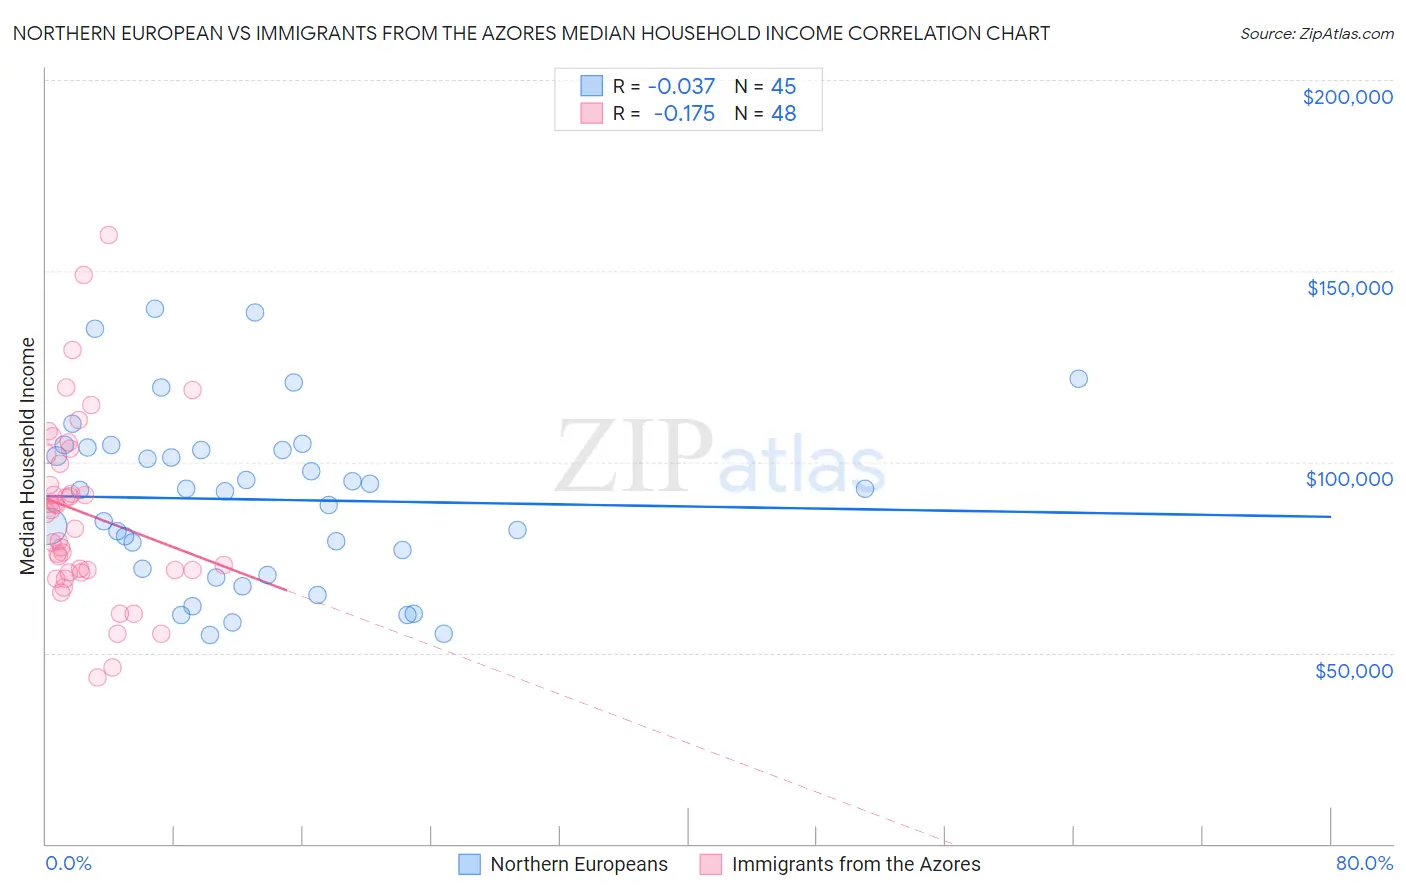 Northern European vs Immigrants from the Azores Median Household Income